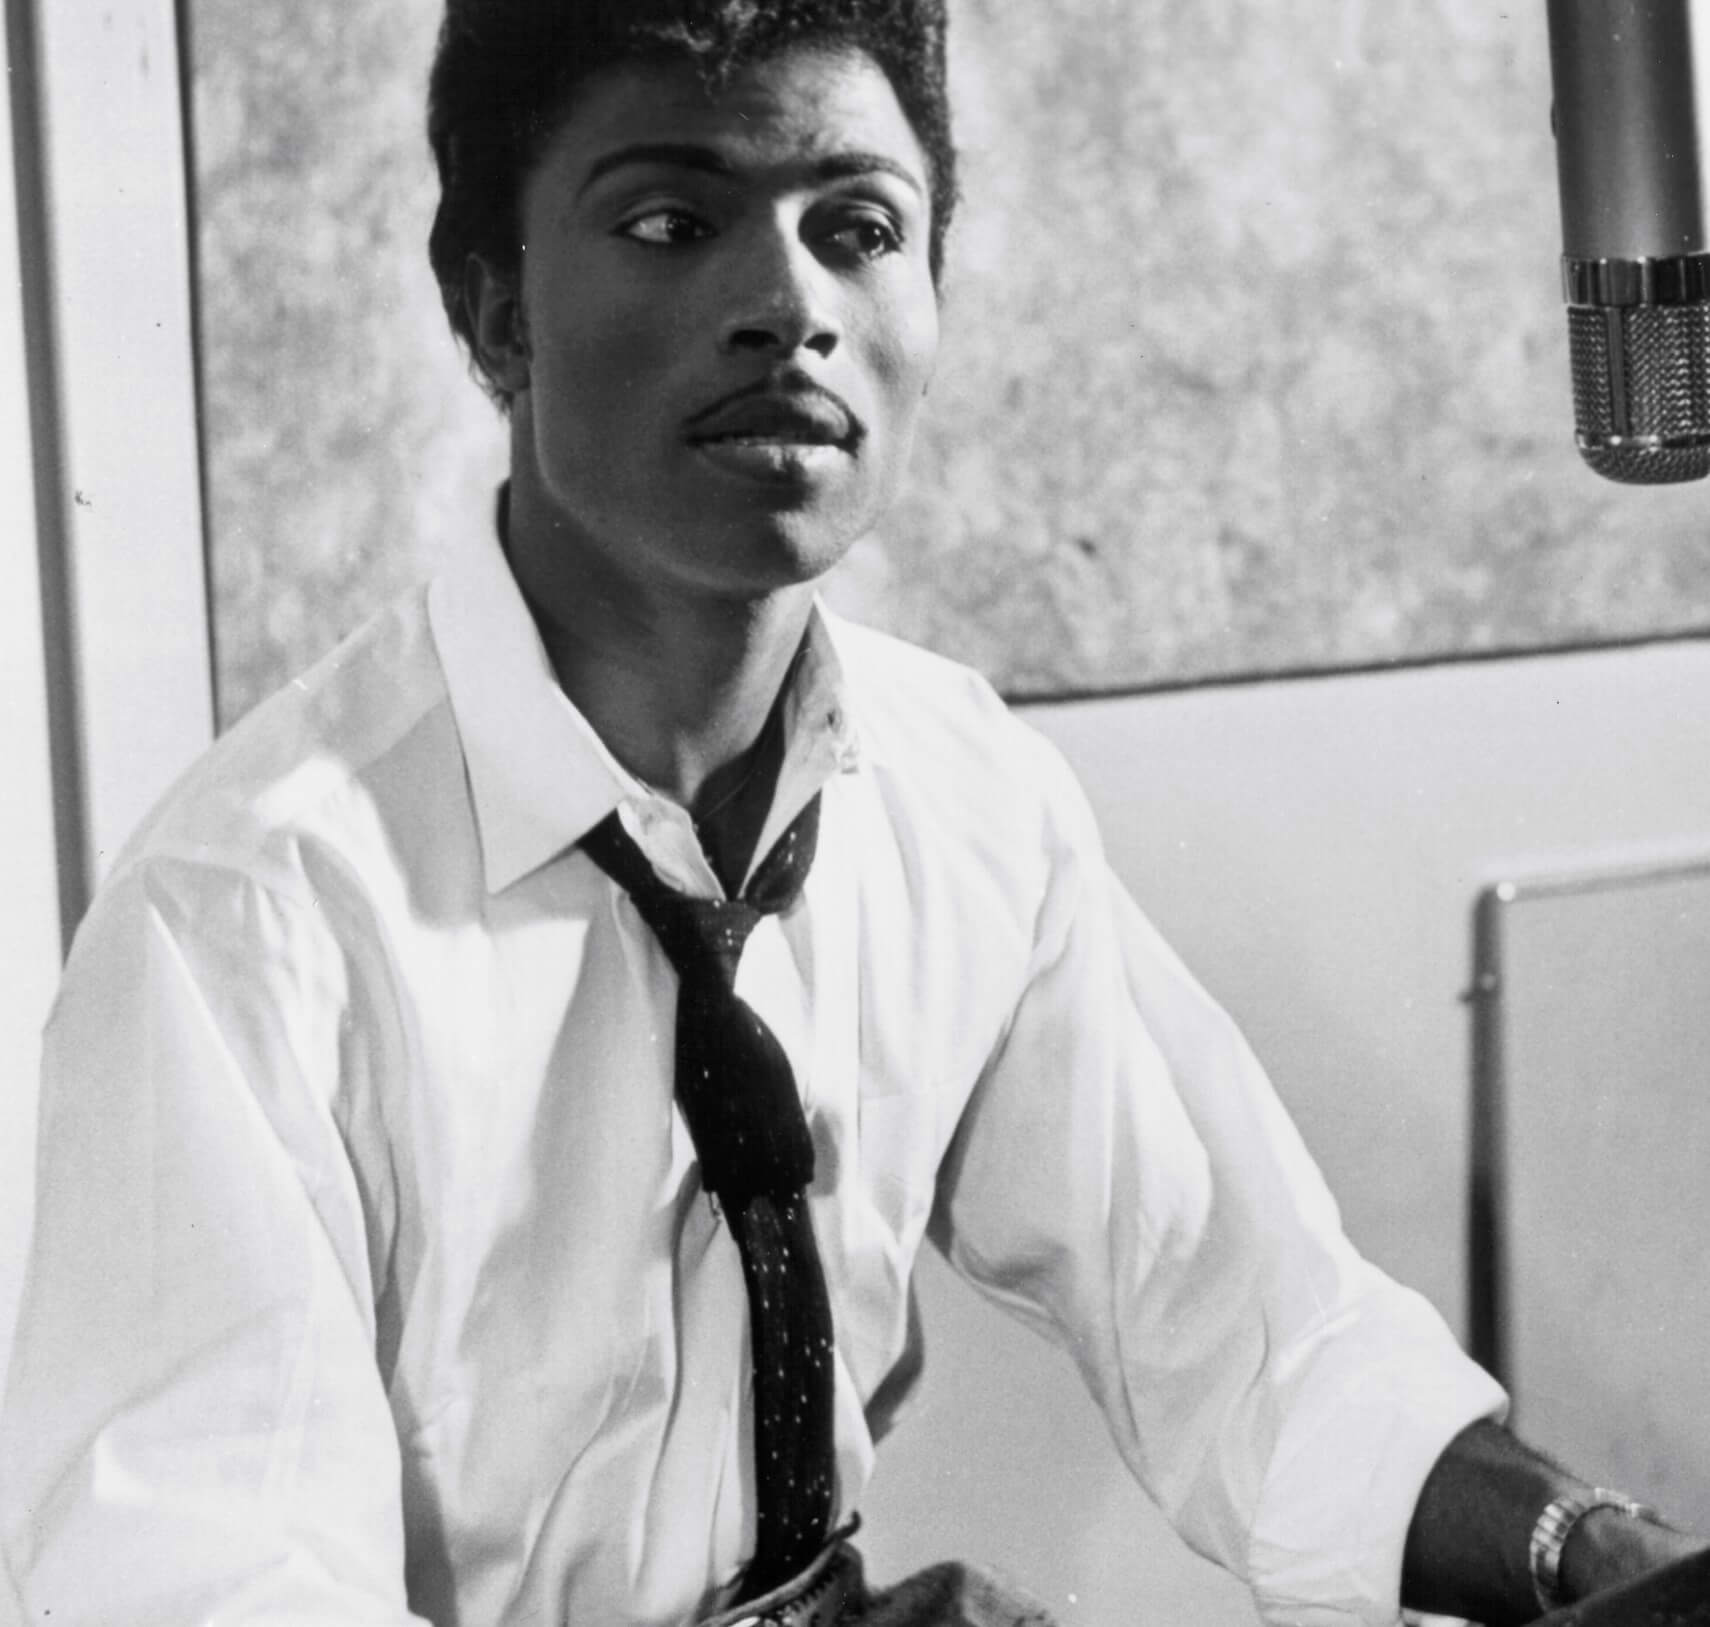 Little Richard in black-and-white